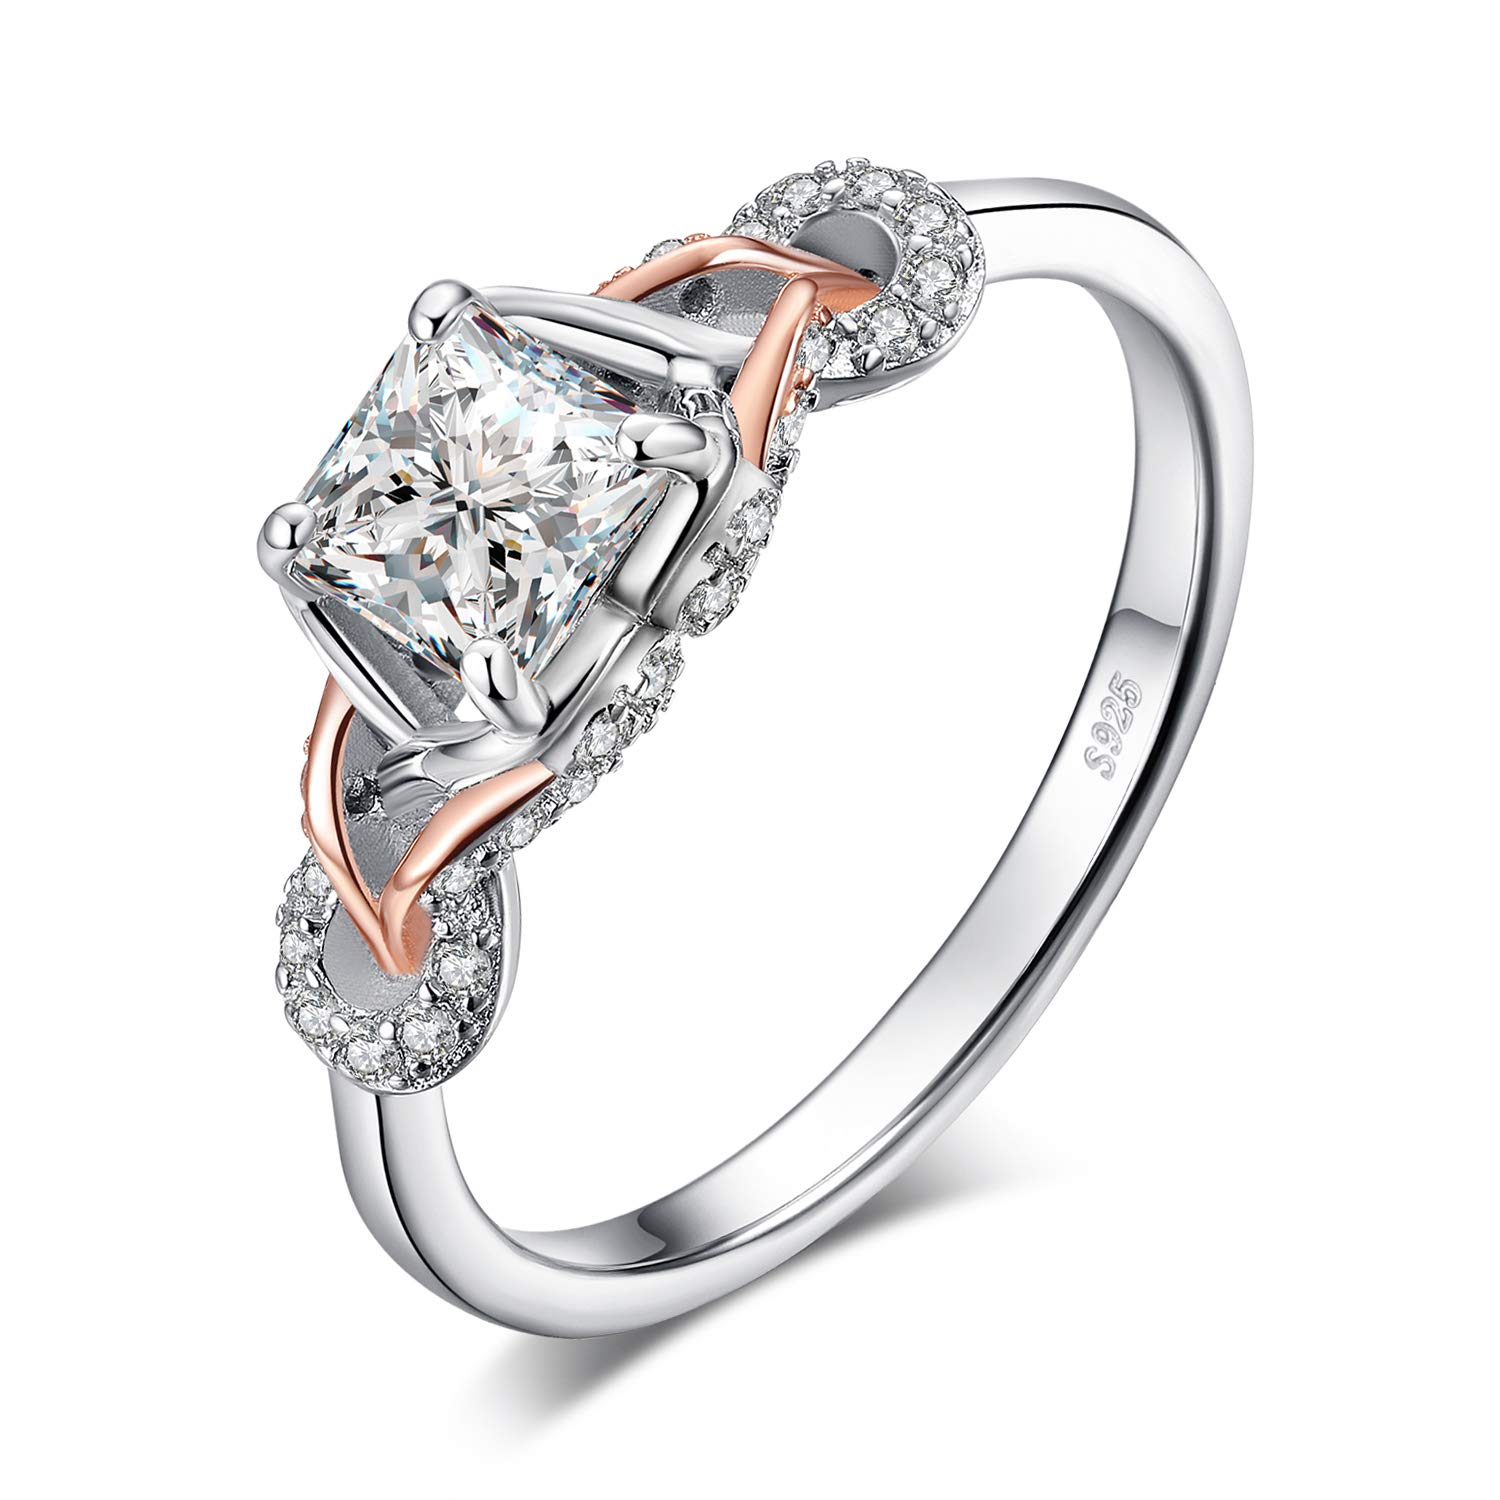 JewelryPalace Infinity Cubic Zirconia Engagement Rings, 925 Sterling Silver 14K Rose Gold Wedding Band Promise Ring Bridal Sets